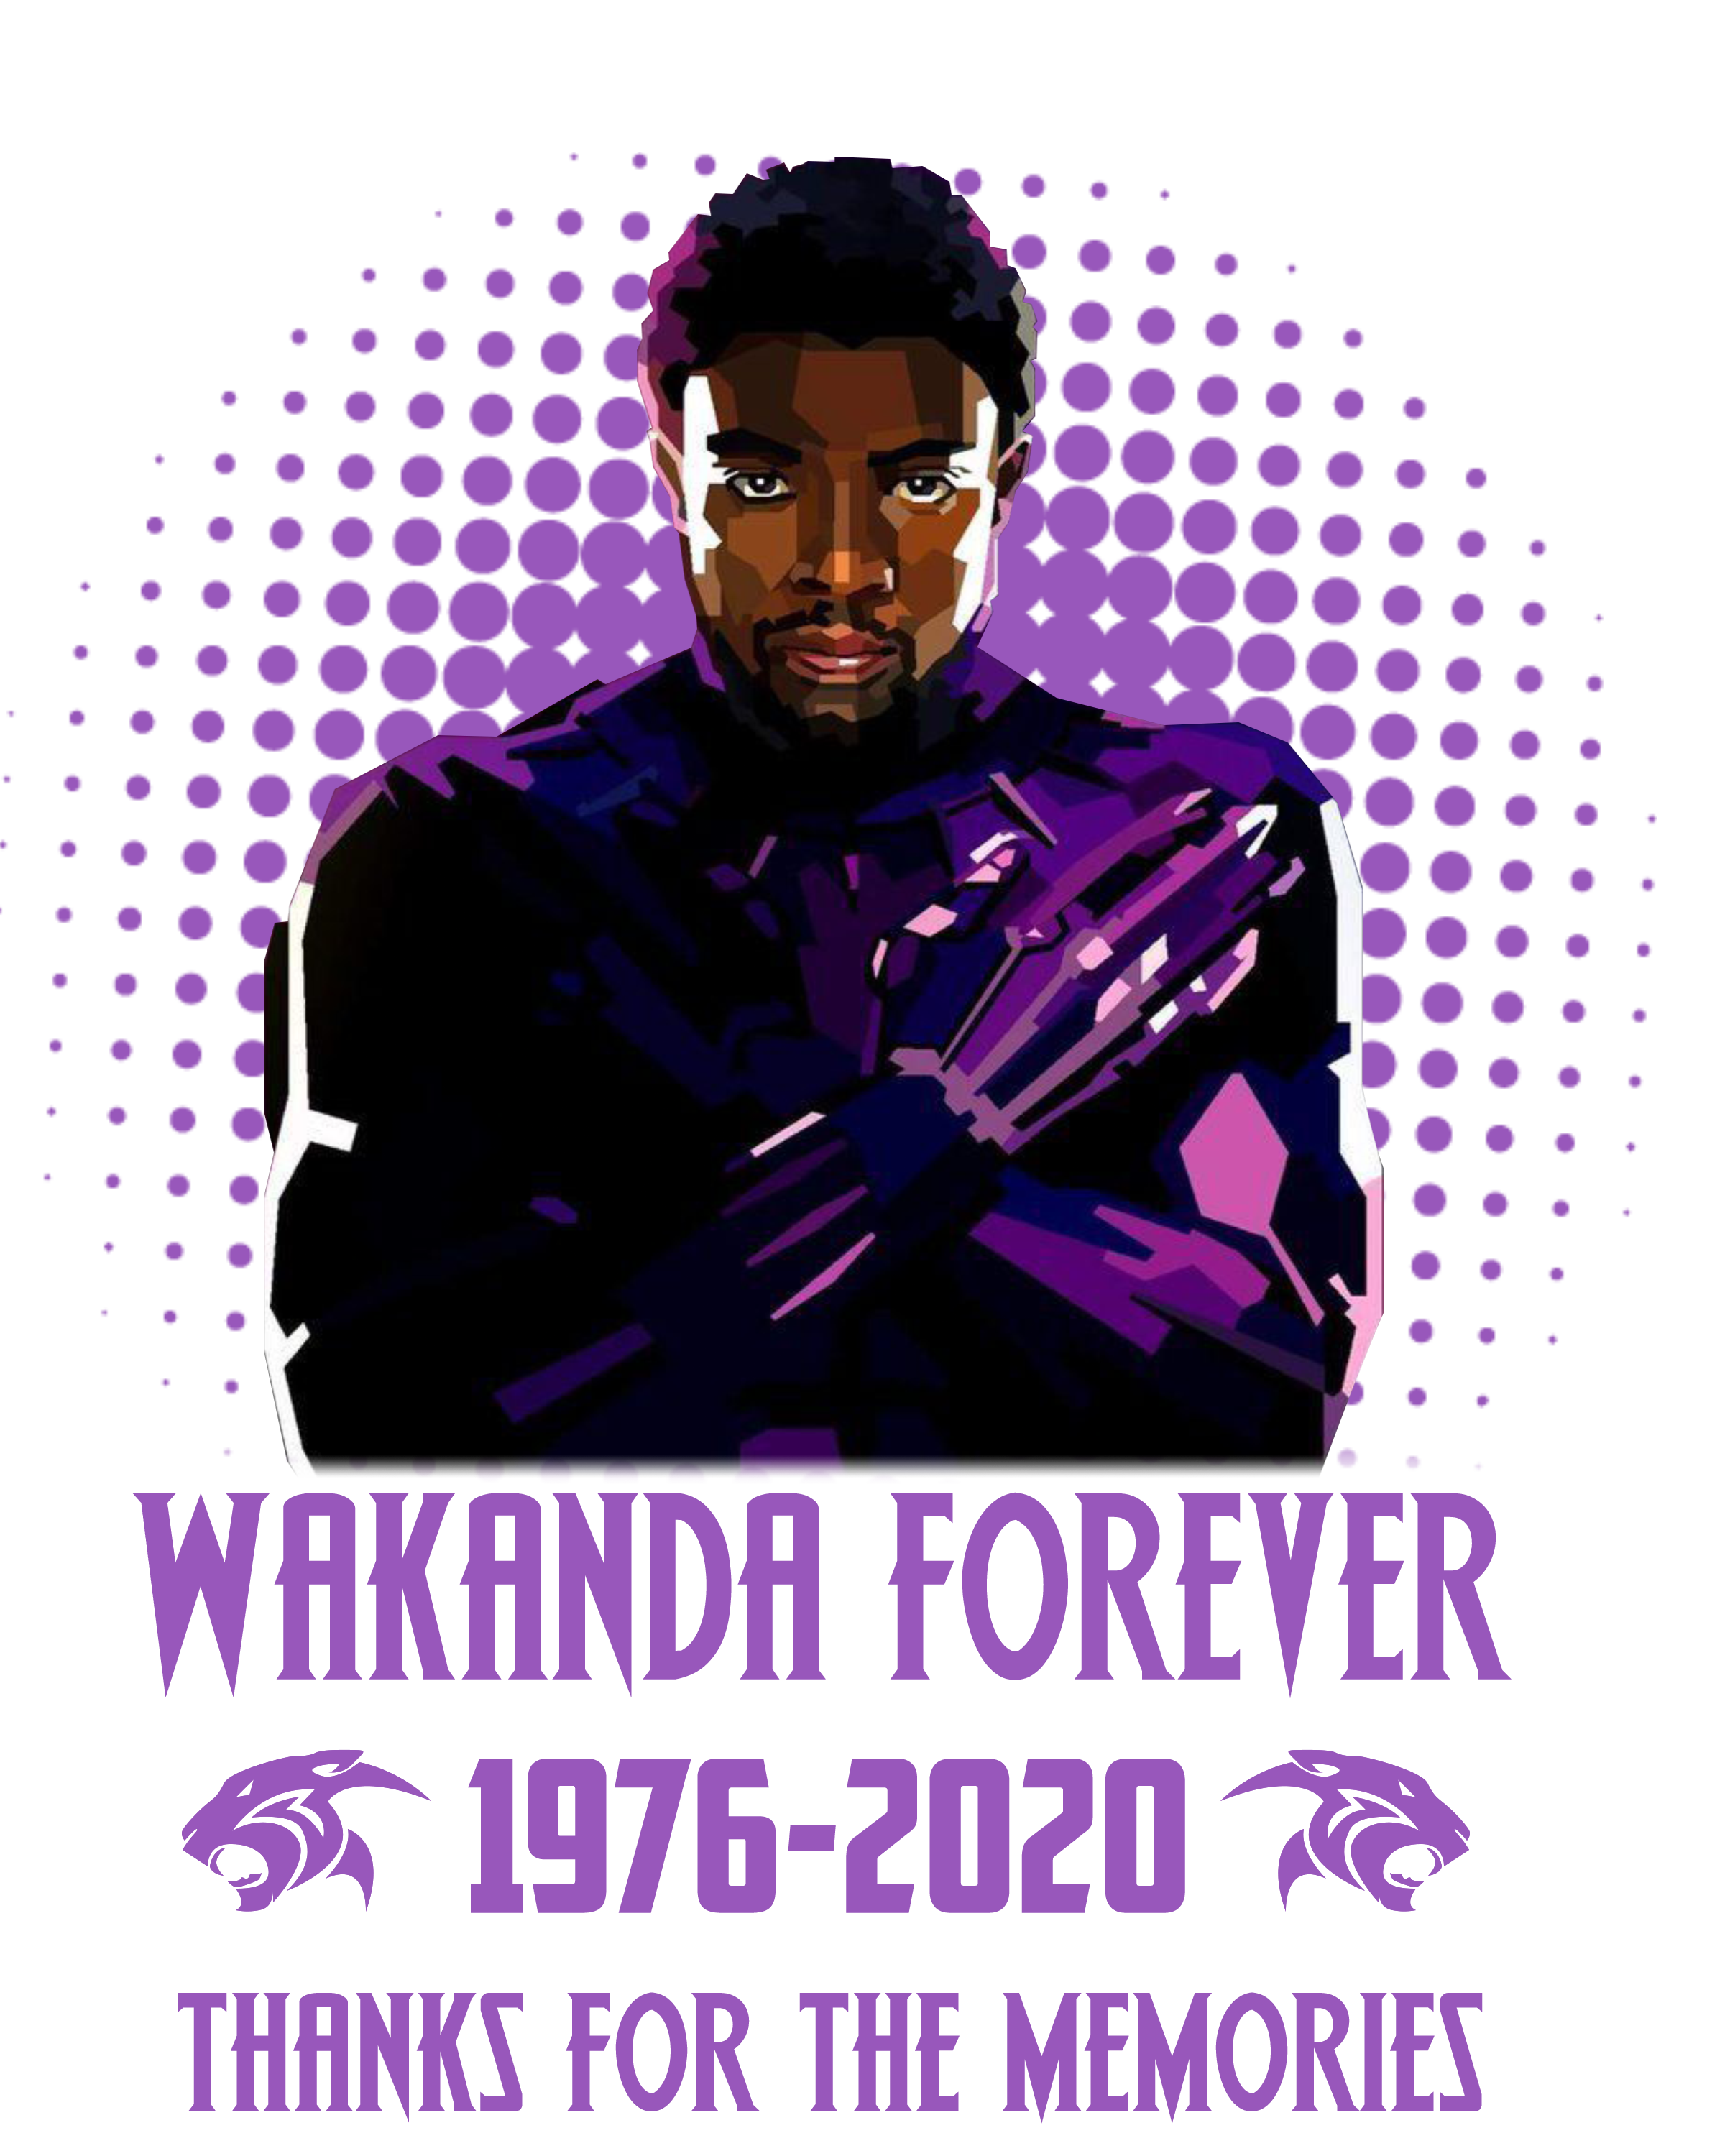 Black Panther: Wakanda Forever for apple download free